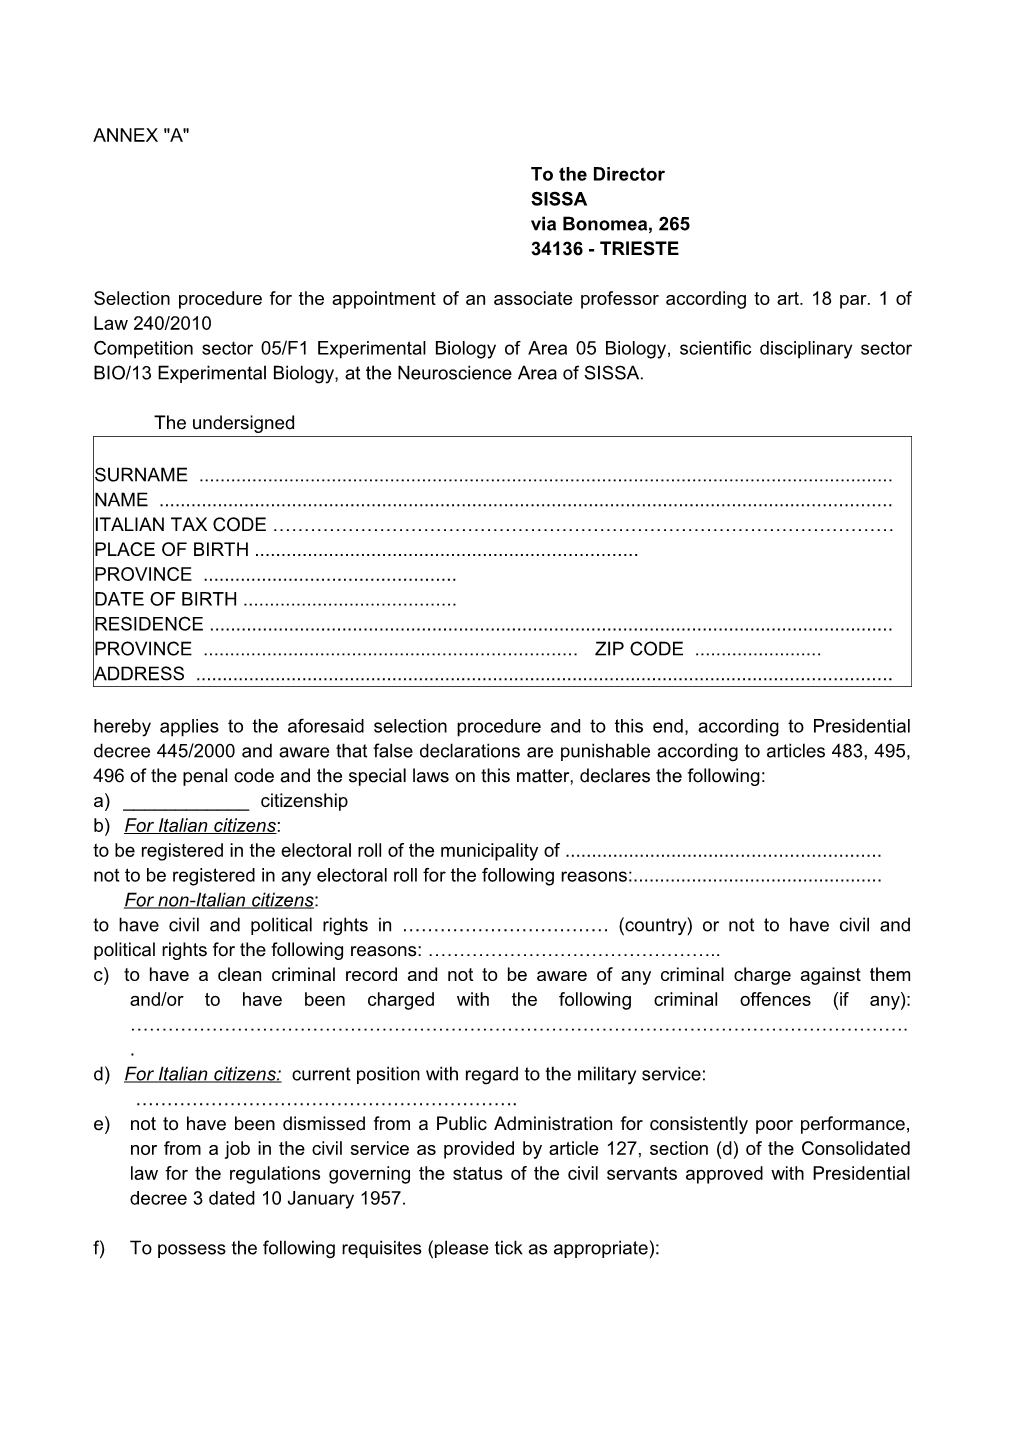 Selection Procedure for the Appointment of Anassociate Professor According to Art. 18 Par